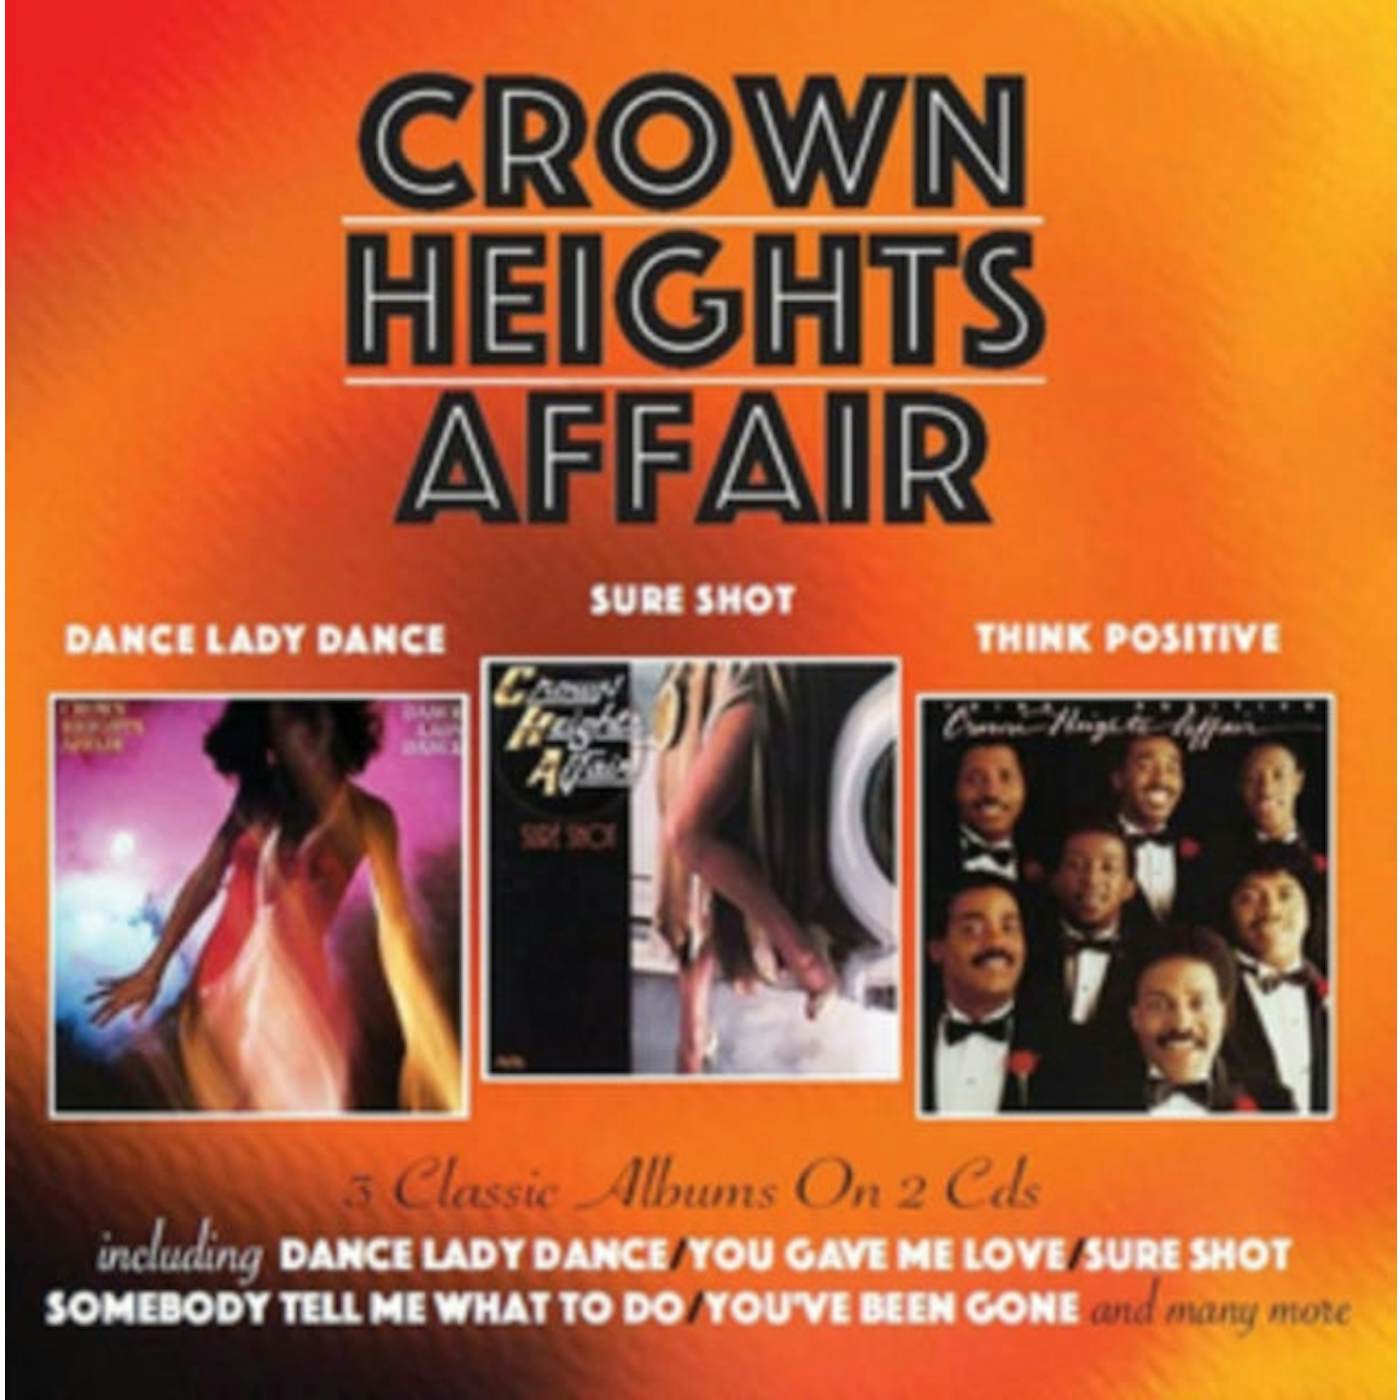 Crown Heights Affair CD - Dance Lady Dance / Sure Shot / Think Positive